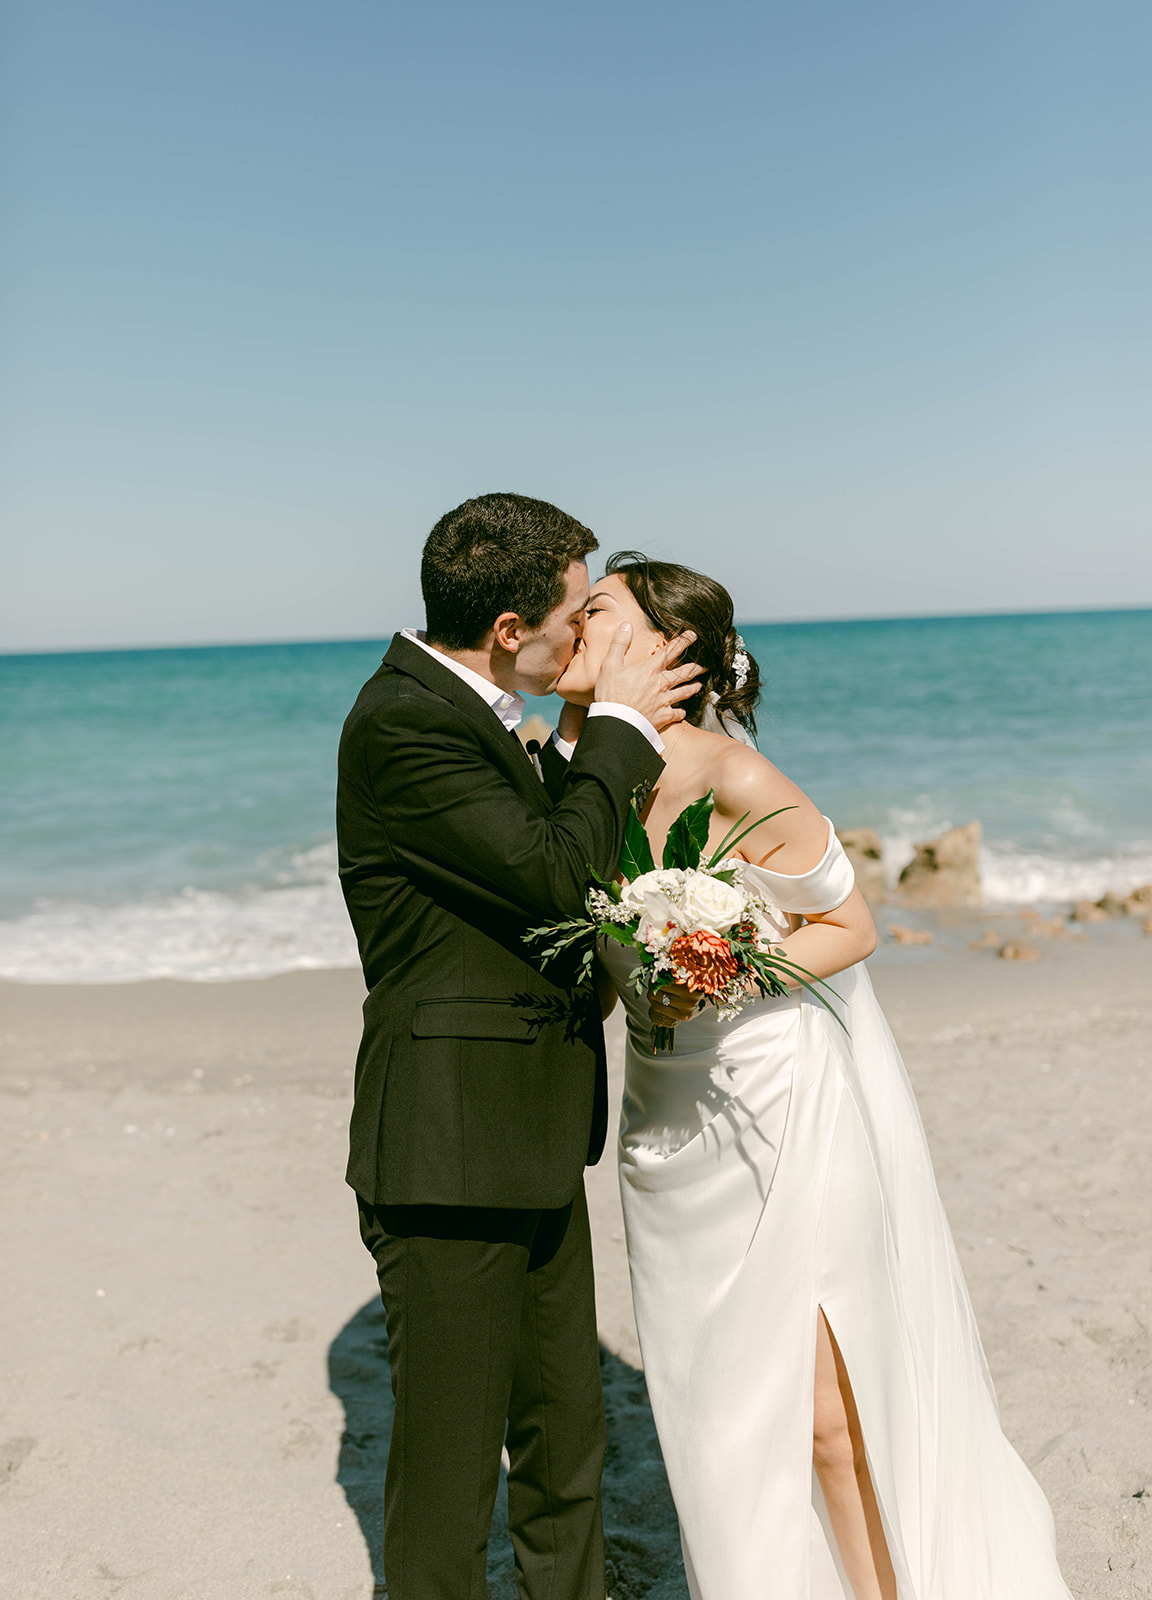 Bride and Groom share their first kiss in intimate Palm Beach, Florida wedding on the beach